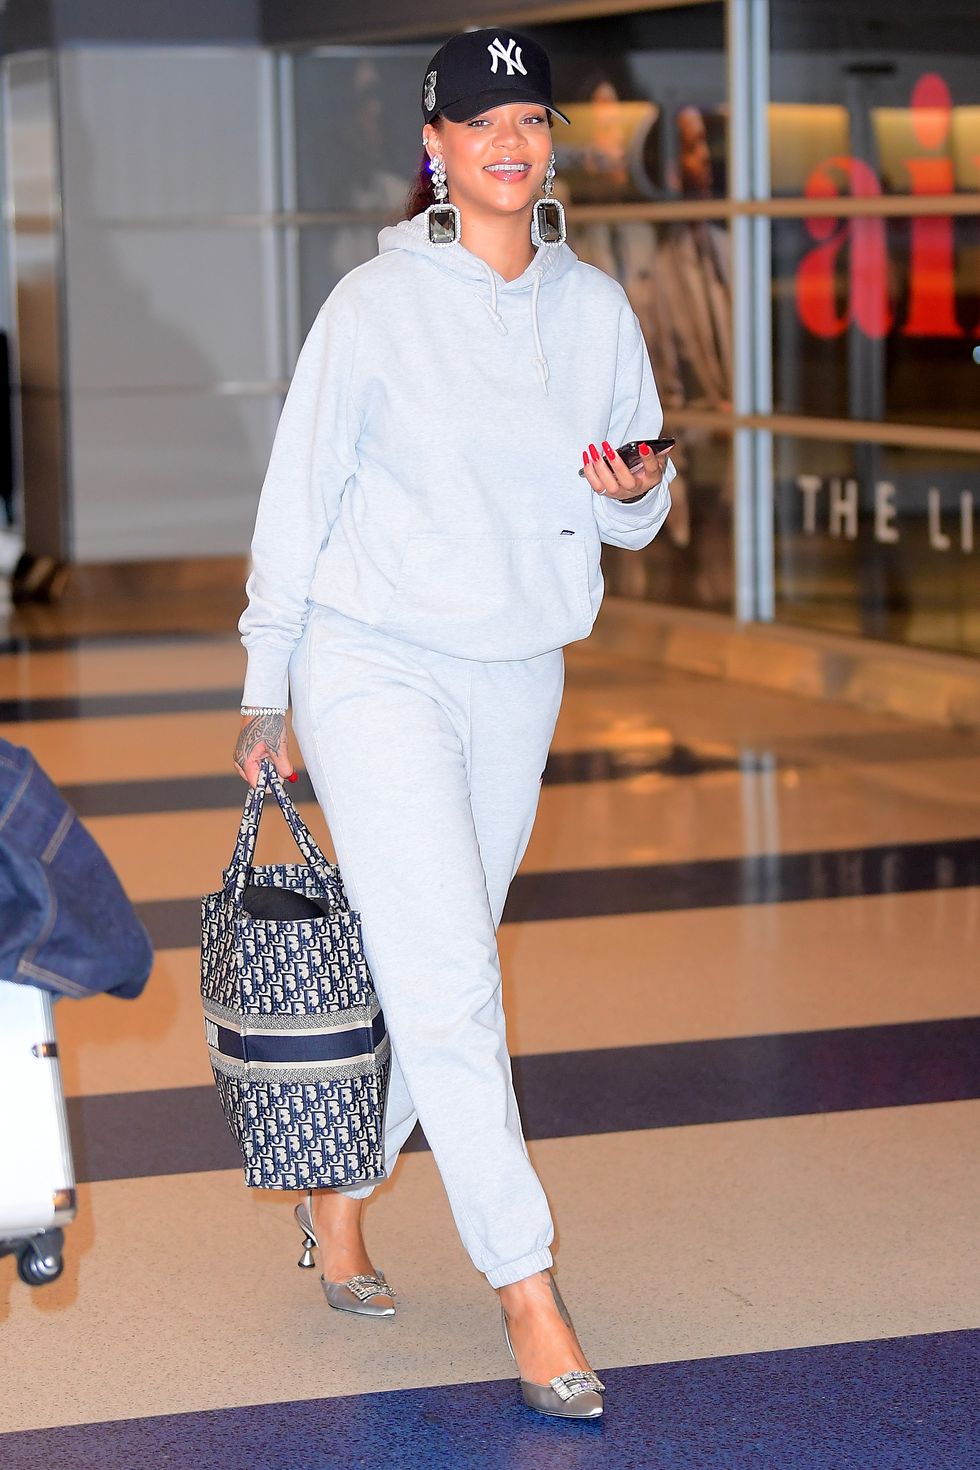 EXCLUSIVE: Rihanna Pairs Manolo Blahnik Heels With A Grey Sweatsuit As She Jets Into NYC For Her Pop Up Shop Opening